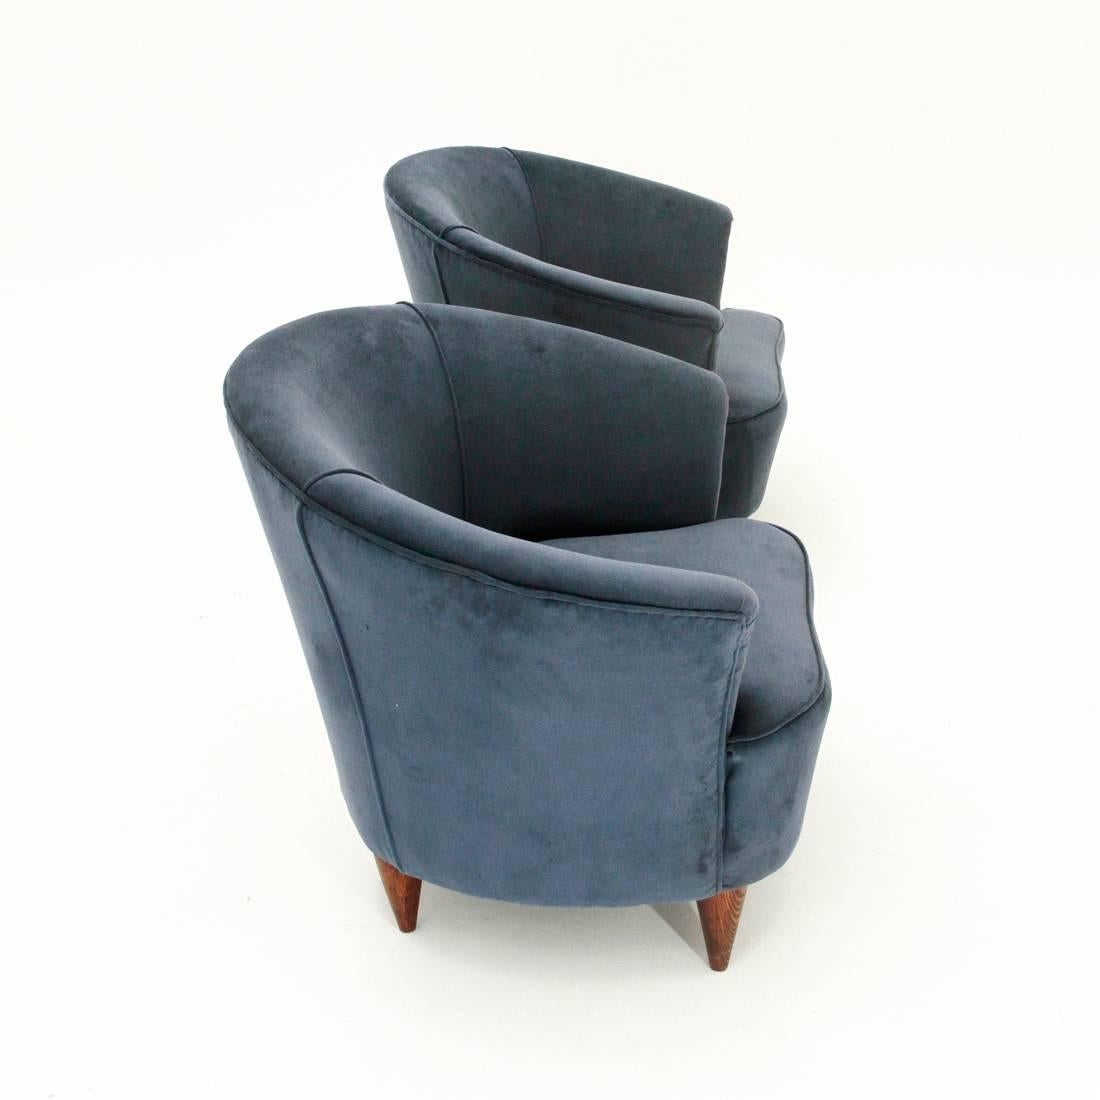 A pair of Italian armchairs produced in the 1950s.
Upholstered and lined wooden structure with new blue velvet fabric.
Conical shaped turned wood feet.
Very good general conditions.

Dimensions: Width 78 cm, depth 65 cm, height 66 cm, seat